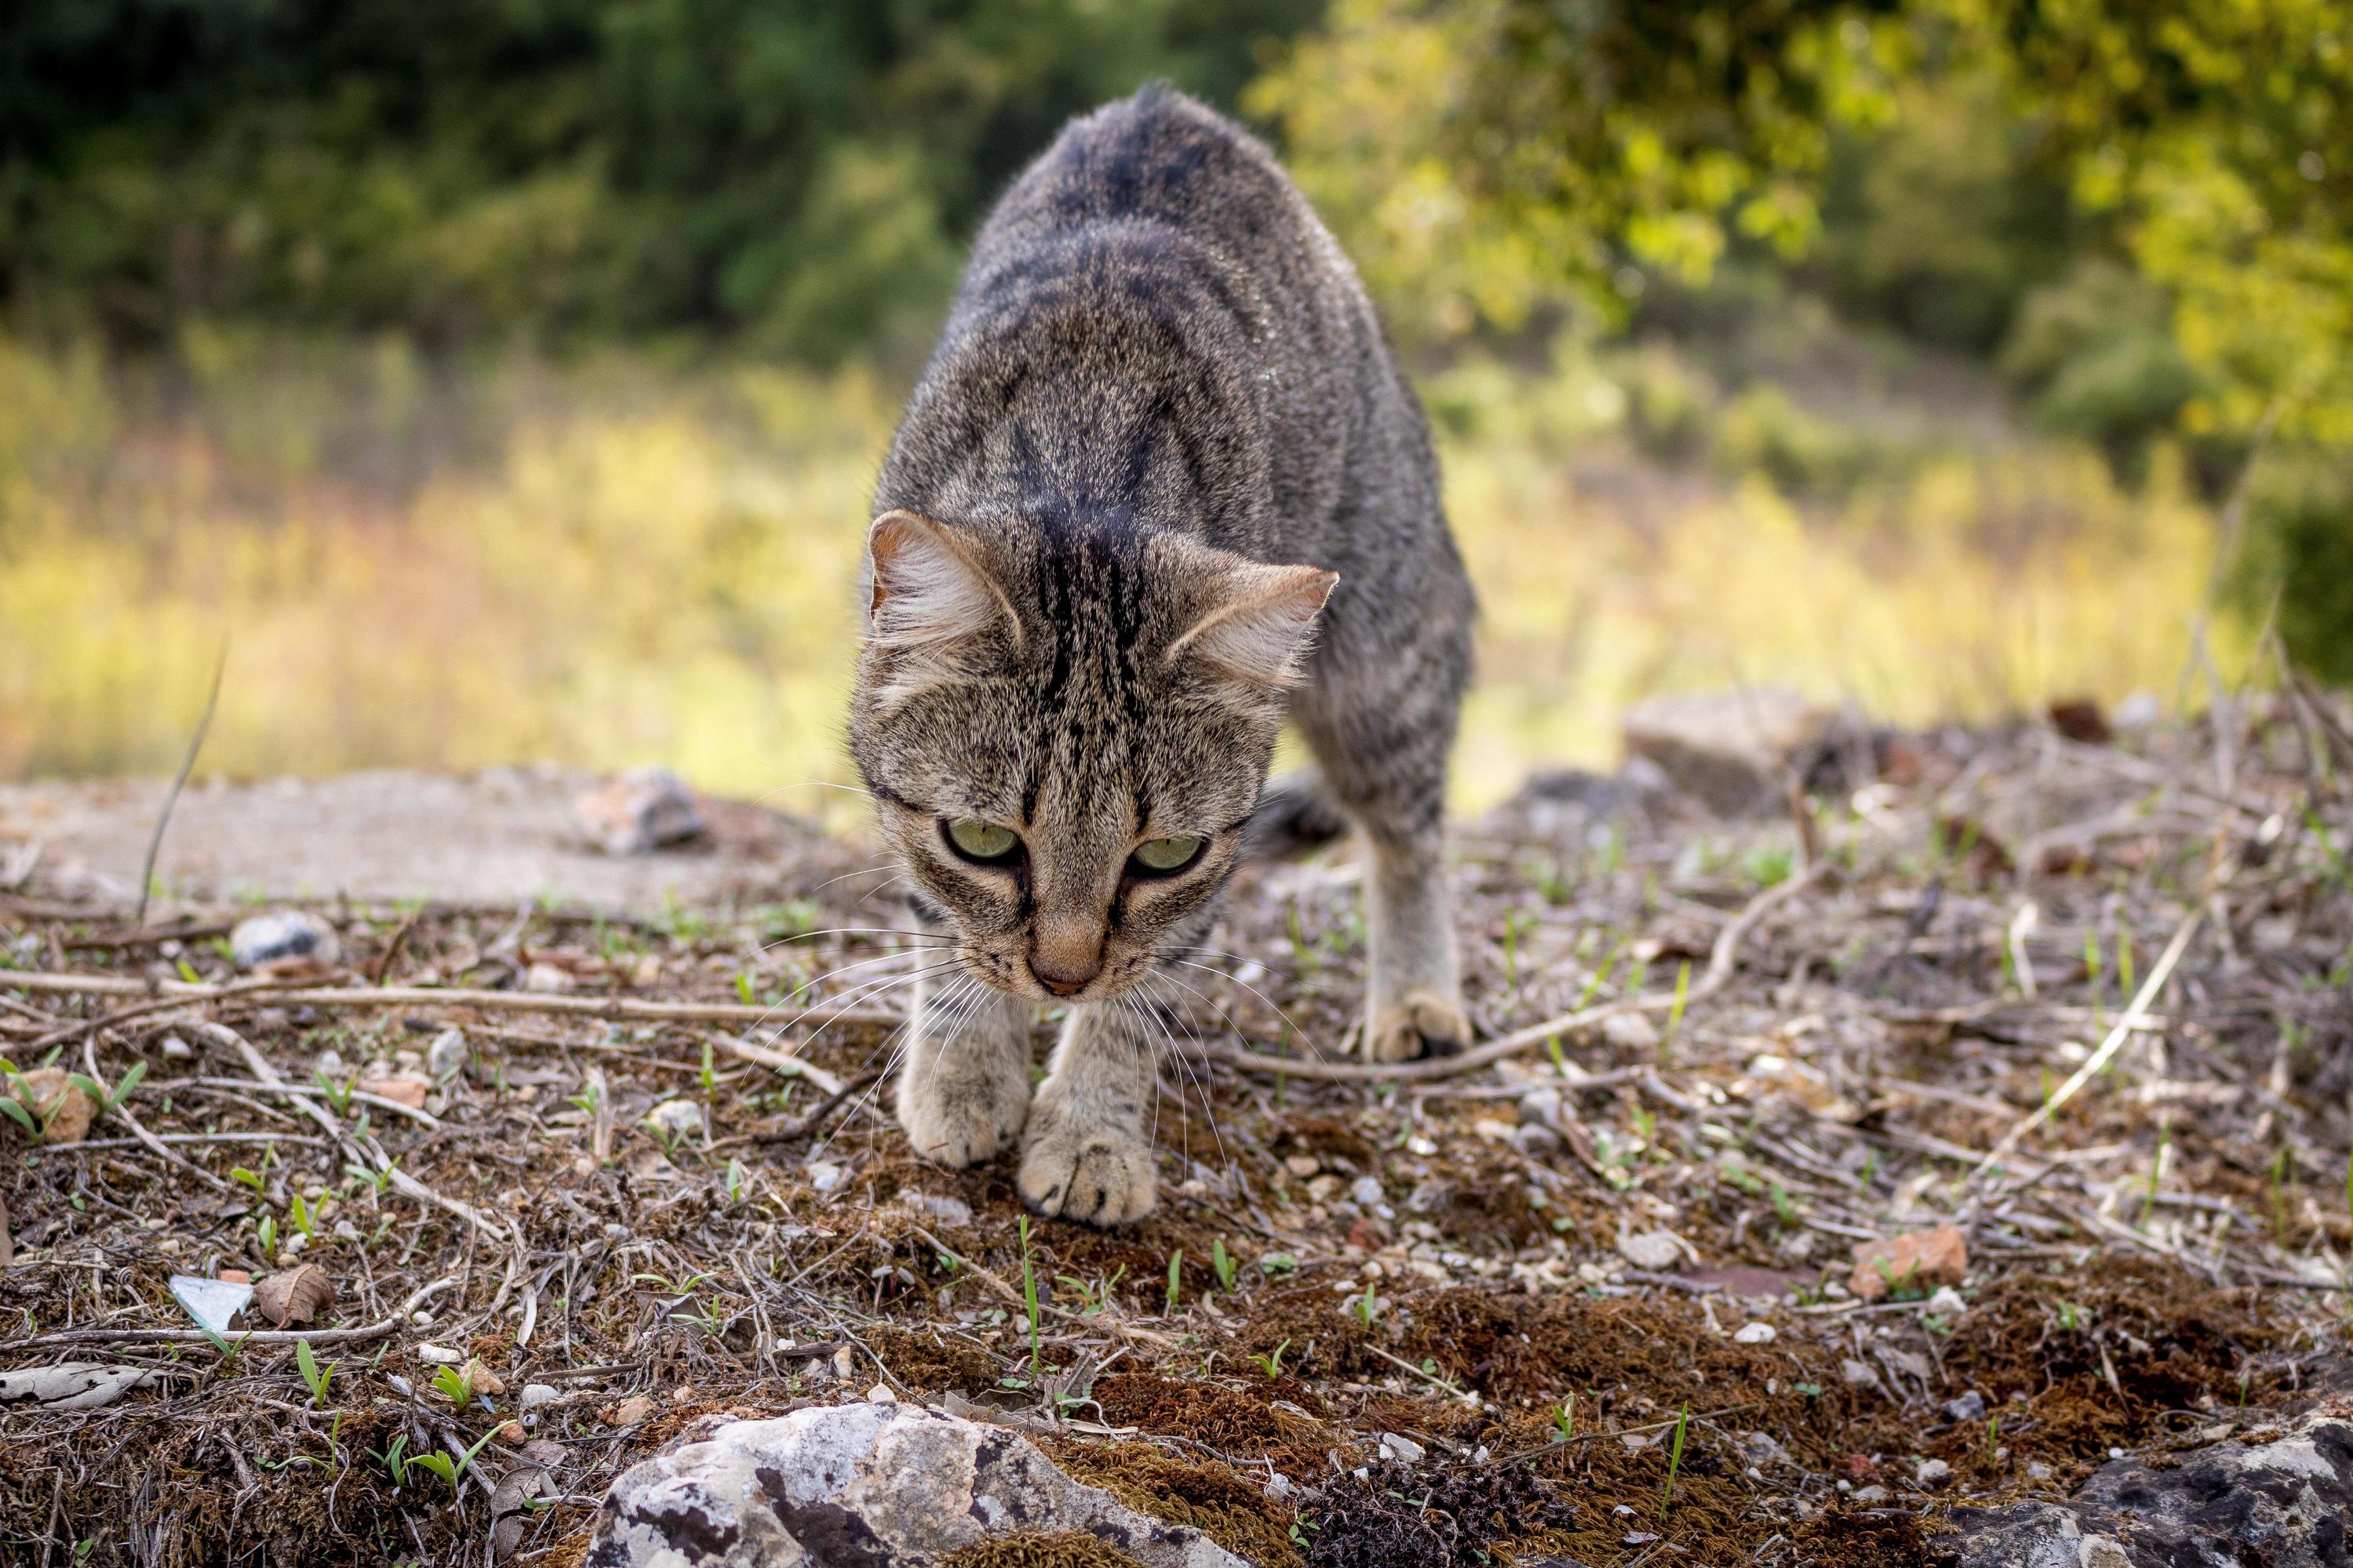 Came across this beautiful cat while hiking the via francigena in tuscany